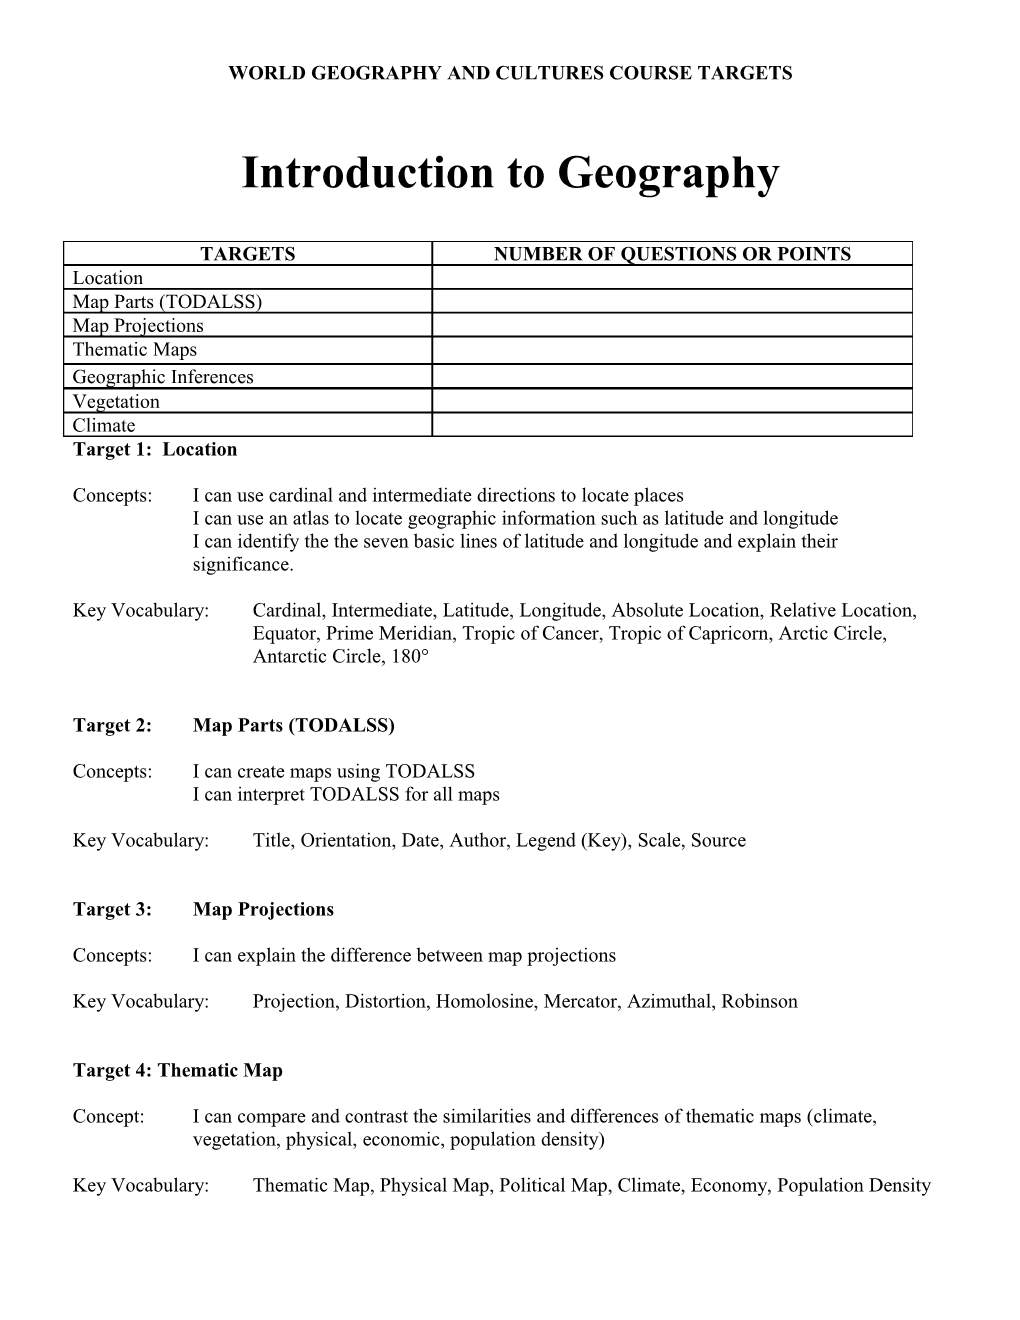 World Geography and Cultures Course Targets